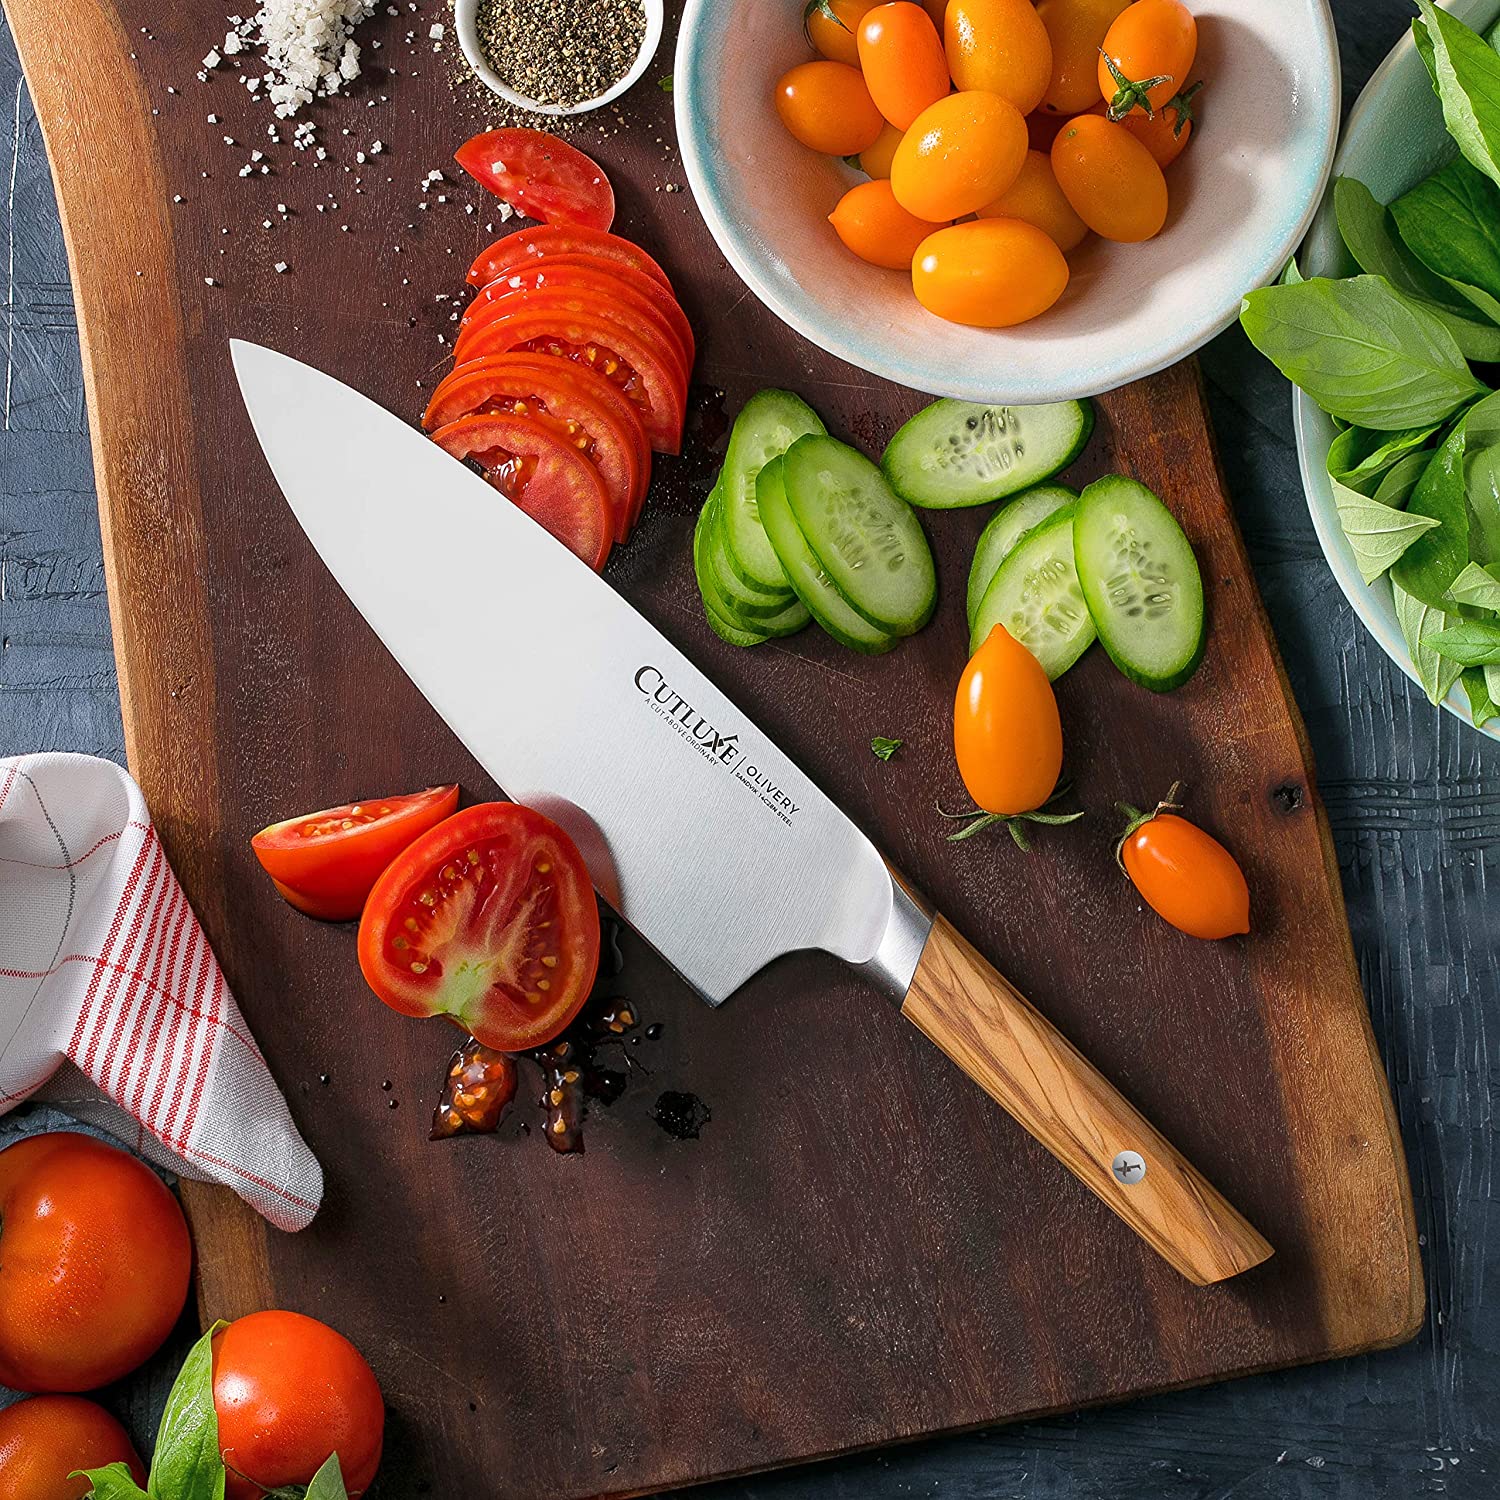 A look and the classic French triangualr bladed chef knife — California  Custom Knives